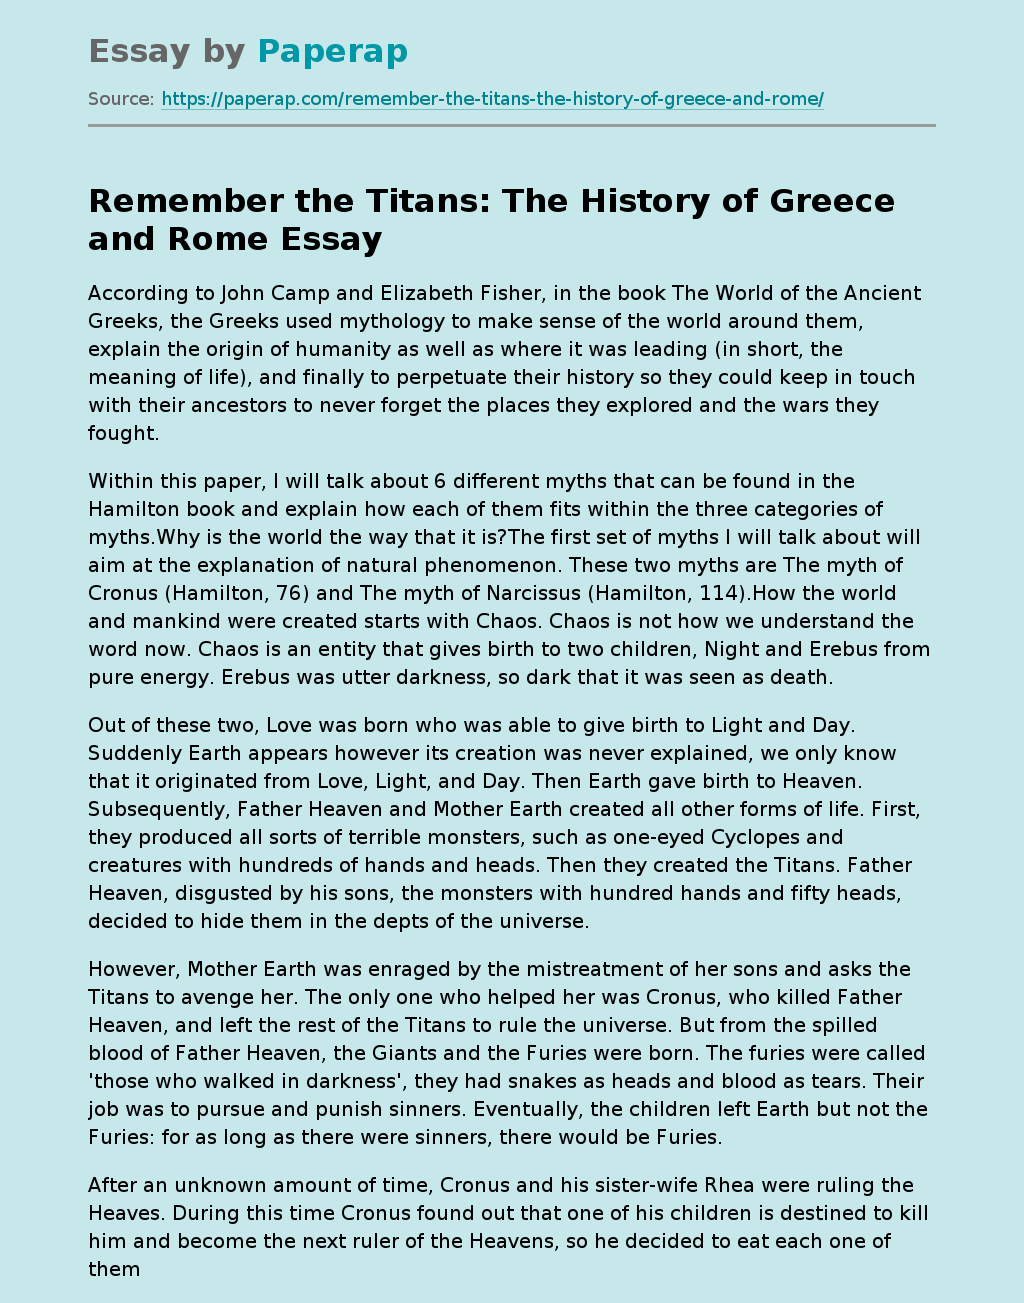 Remember the Titans: The History of Greece and Rome